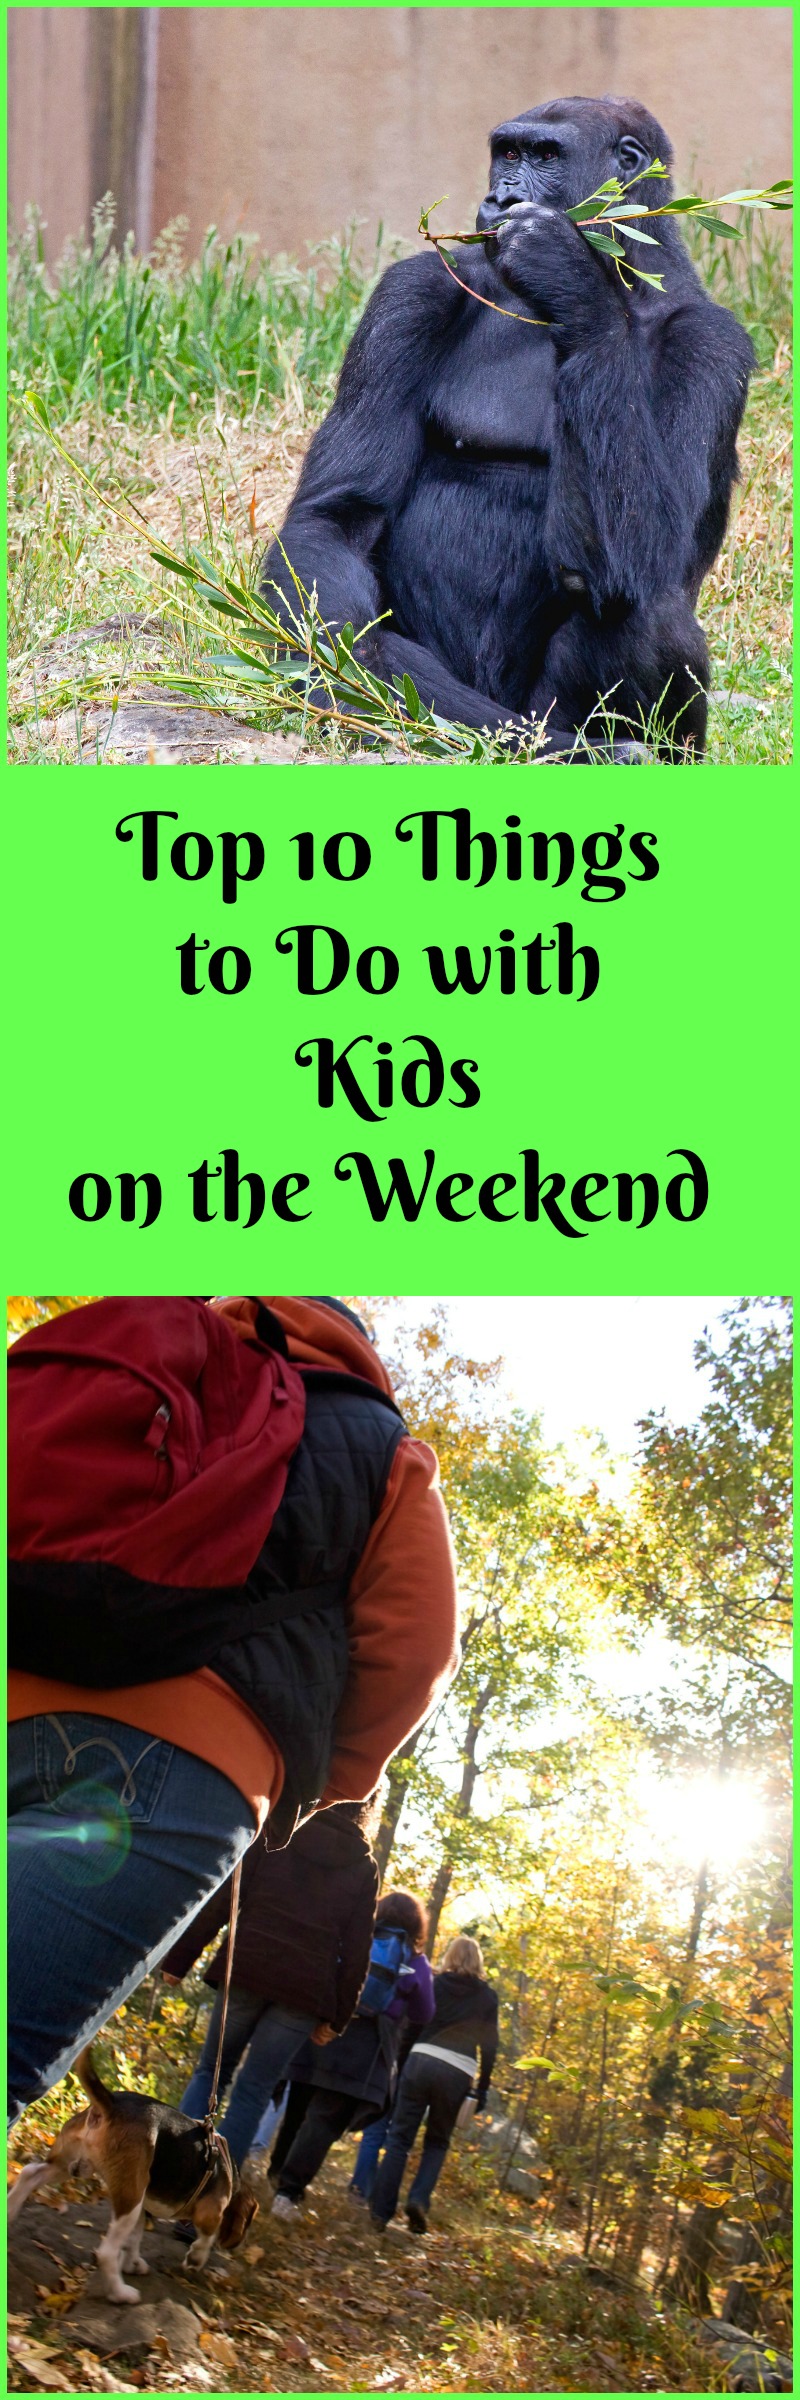 Top 10 Things to Do with Kids on the Weekend